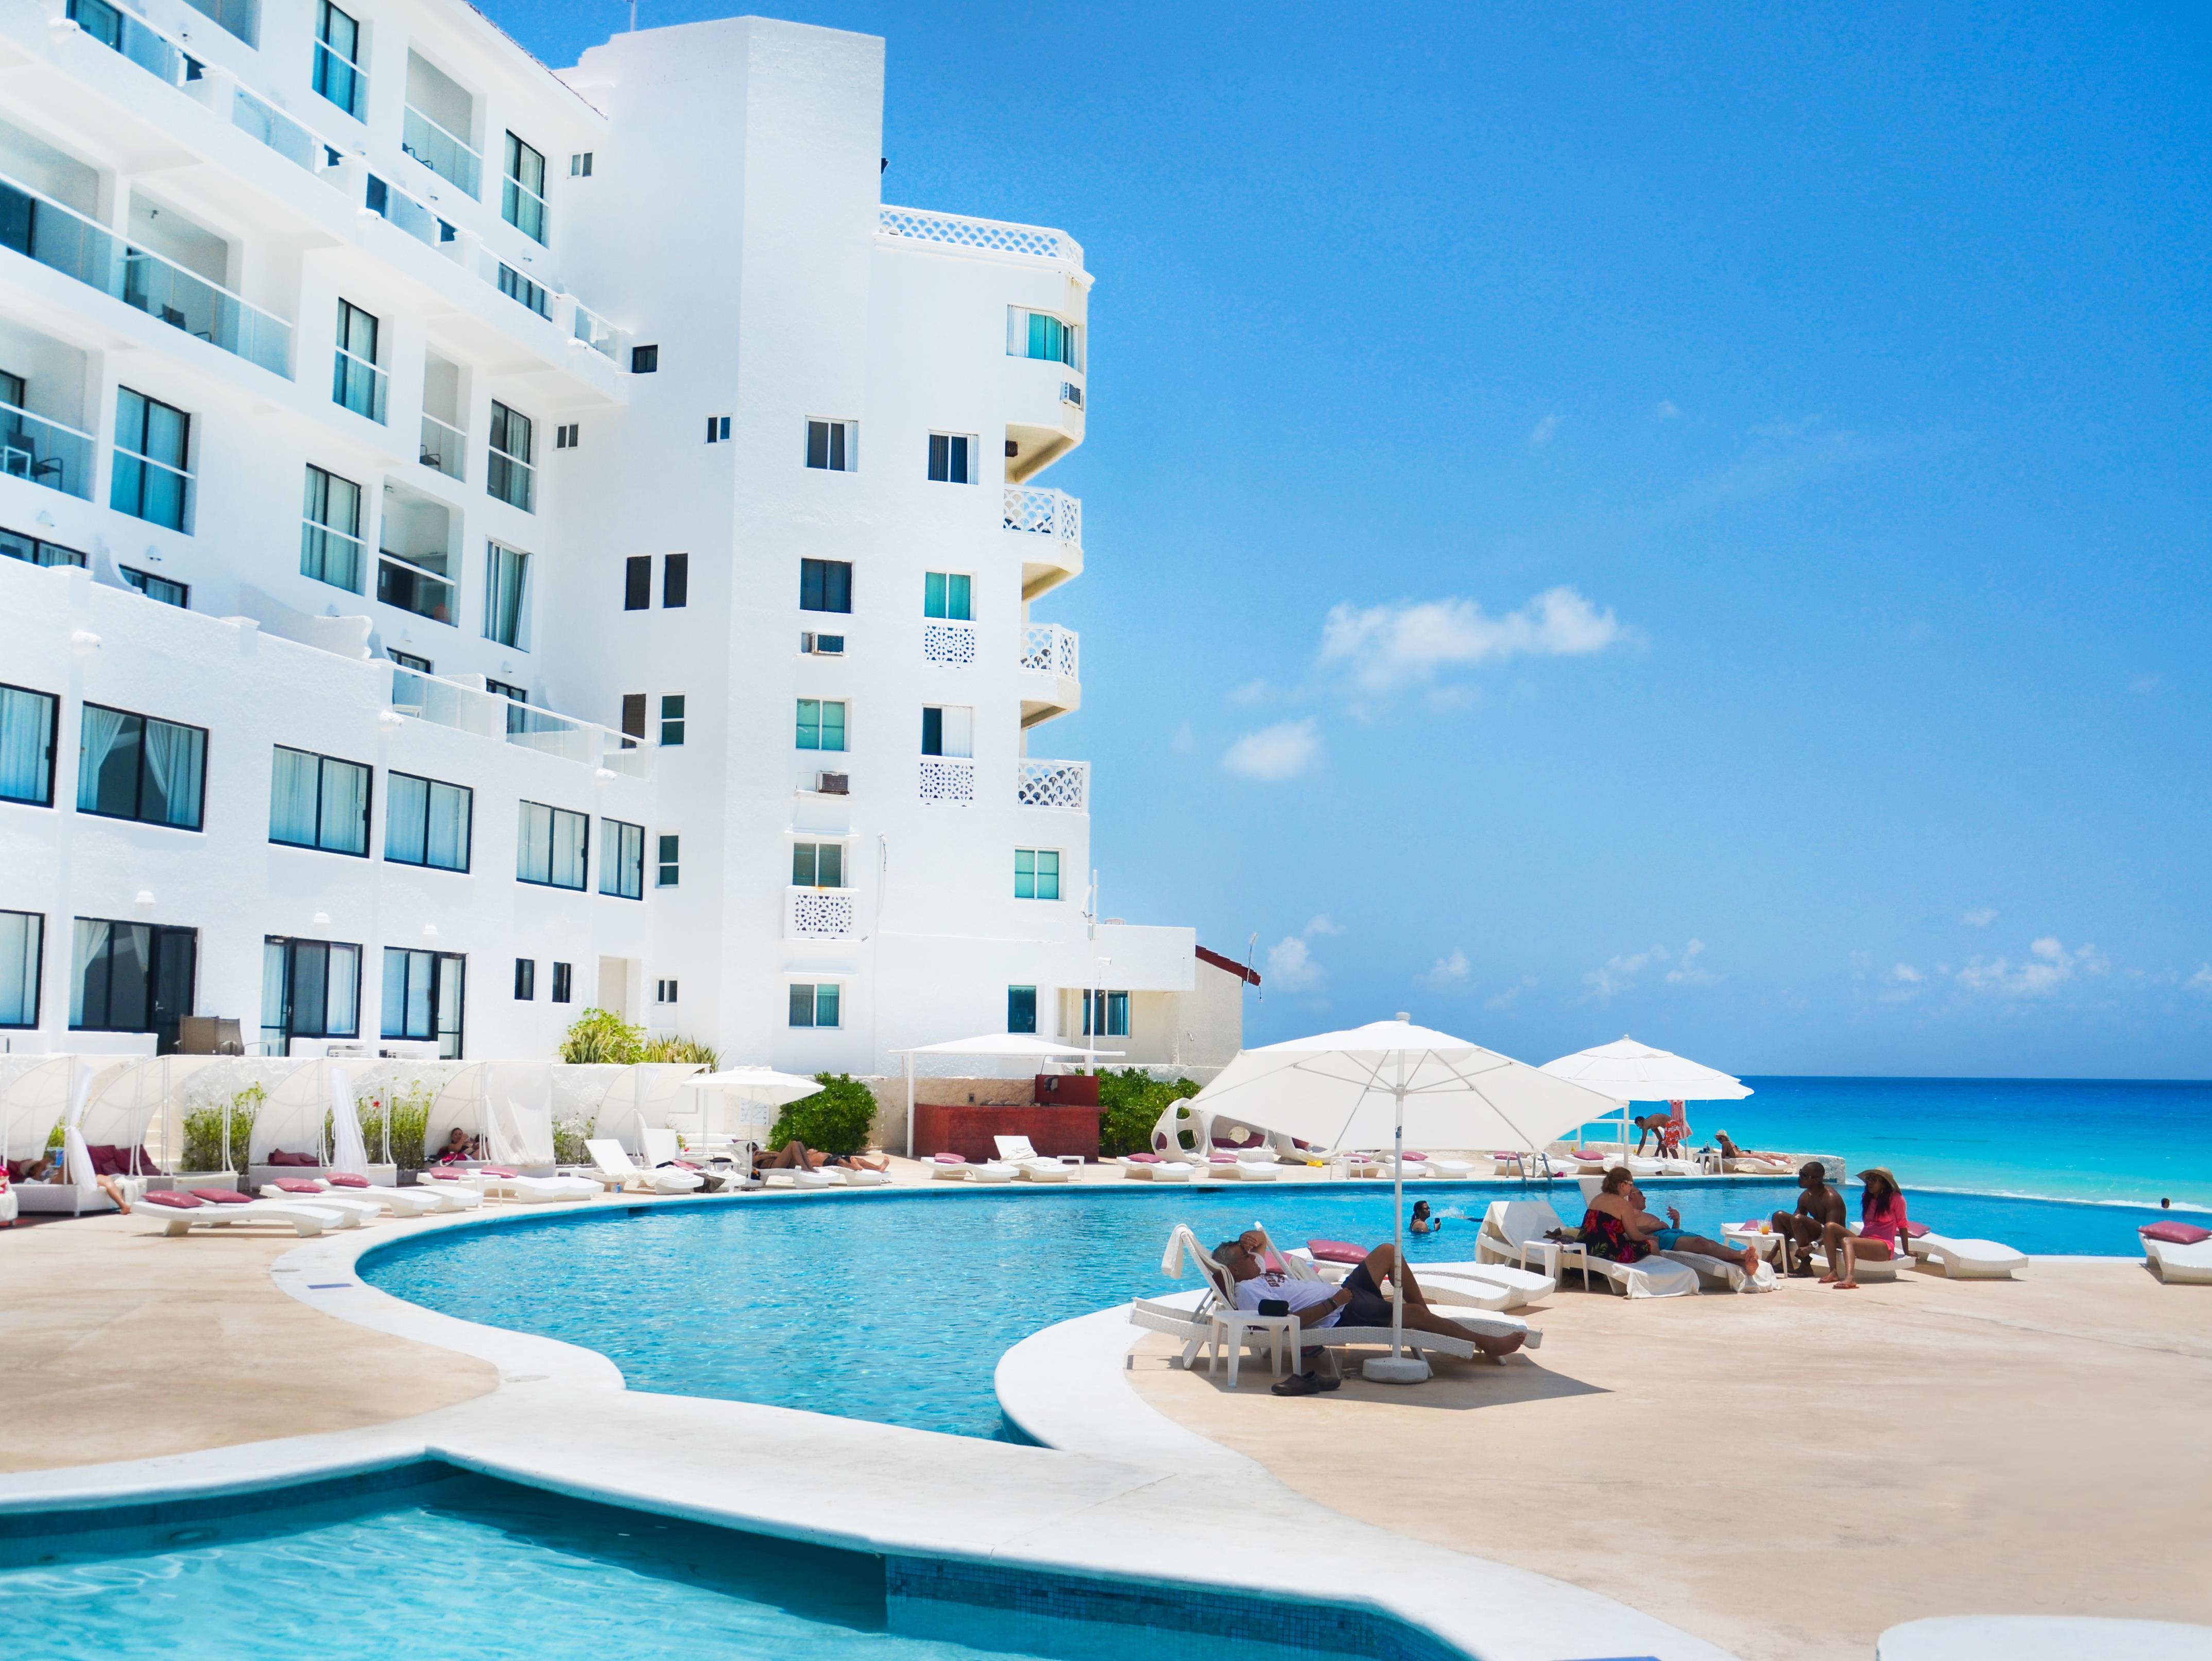 Bel Air Collection Resort and Spa Cancun Cancun FAQ 2016, What facilities are there in Bel Air Collection Resort and Spa Cancun Cancun 2016, What Languages Spoken are Supported in Bel Air Collection Resort and Spa Cancun Cancun 2016, Which payment cards are accepted in Bel Air Collection Resort and Spa Cancun Cancun , Cancun Bel Air Collection Resort and Spa Cancun room facilities and services Q&A 2016, Cancun Bel Air Collection Resort and Spa Cancun online booking services 2016, Cancun Bel Air Collection Resort and Spa Cancun address 2016, Cancun Bel Air Collection Resort and Spa Cancun telephone number 2016,Cancun Bel Air Collection Resort and Spa Cancun map 2016, Cancun Bel Air Collection Resort and Spa Cancun traffic guide 2016, how to go Cancun Bel Air Collection Resort and Spa Cancun, Cancun Bel Air Collection Resort and Spa Cancun booking online 2016, Cancun Bel Air Collection Resort and Spa Cancun room types 2016.